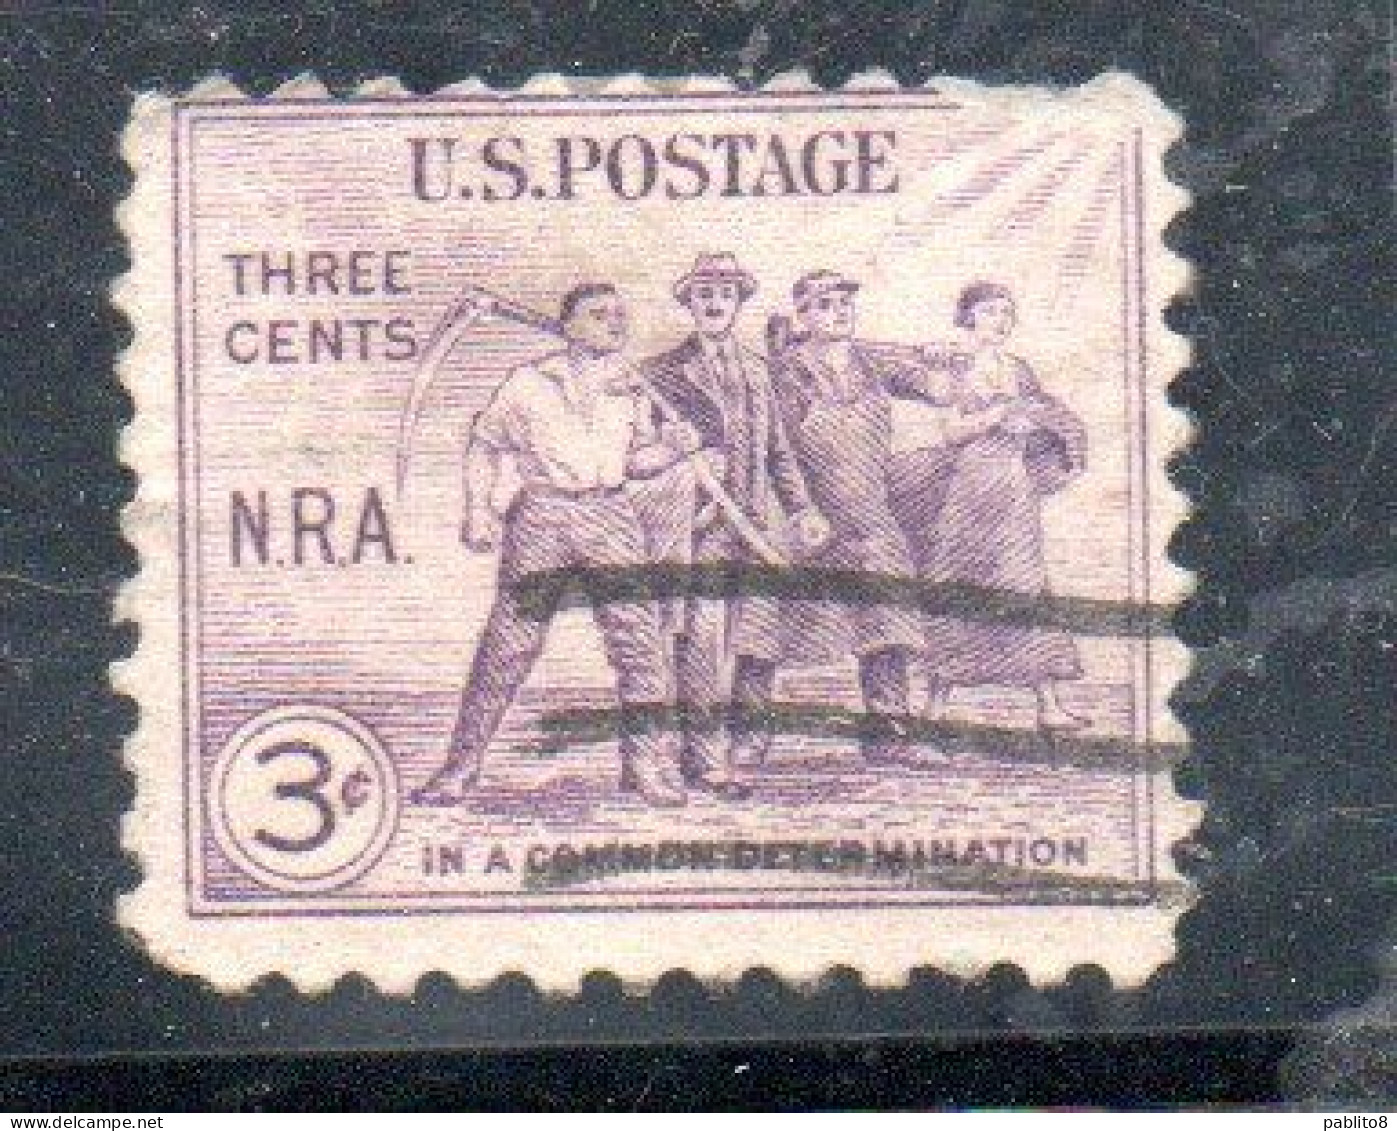 USA STATI UNITI 1933 NATIONAL RECOVERY ACT ISSUE NRA GROUP OF WORKERS CENT 3c STRIP USED USATO OBLITERE' - Used Stamps